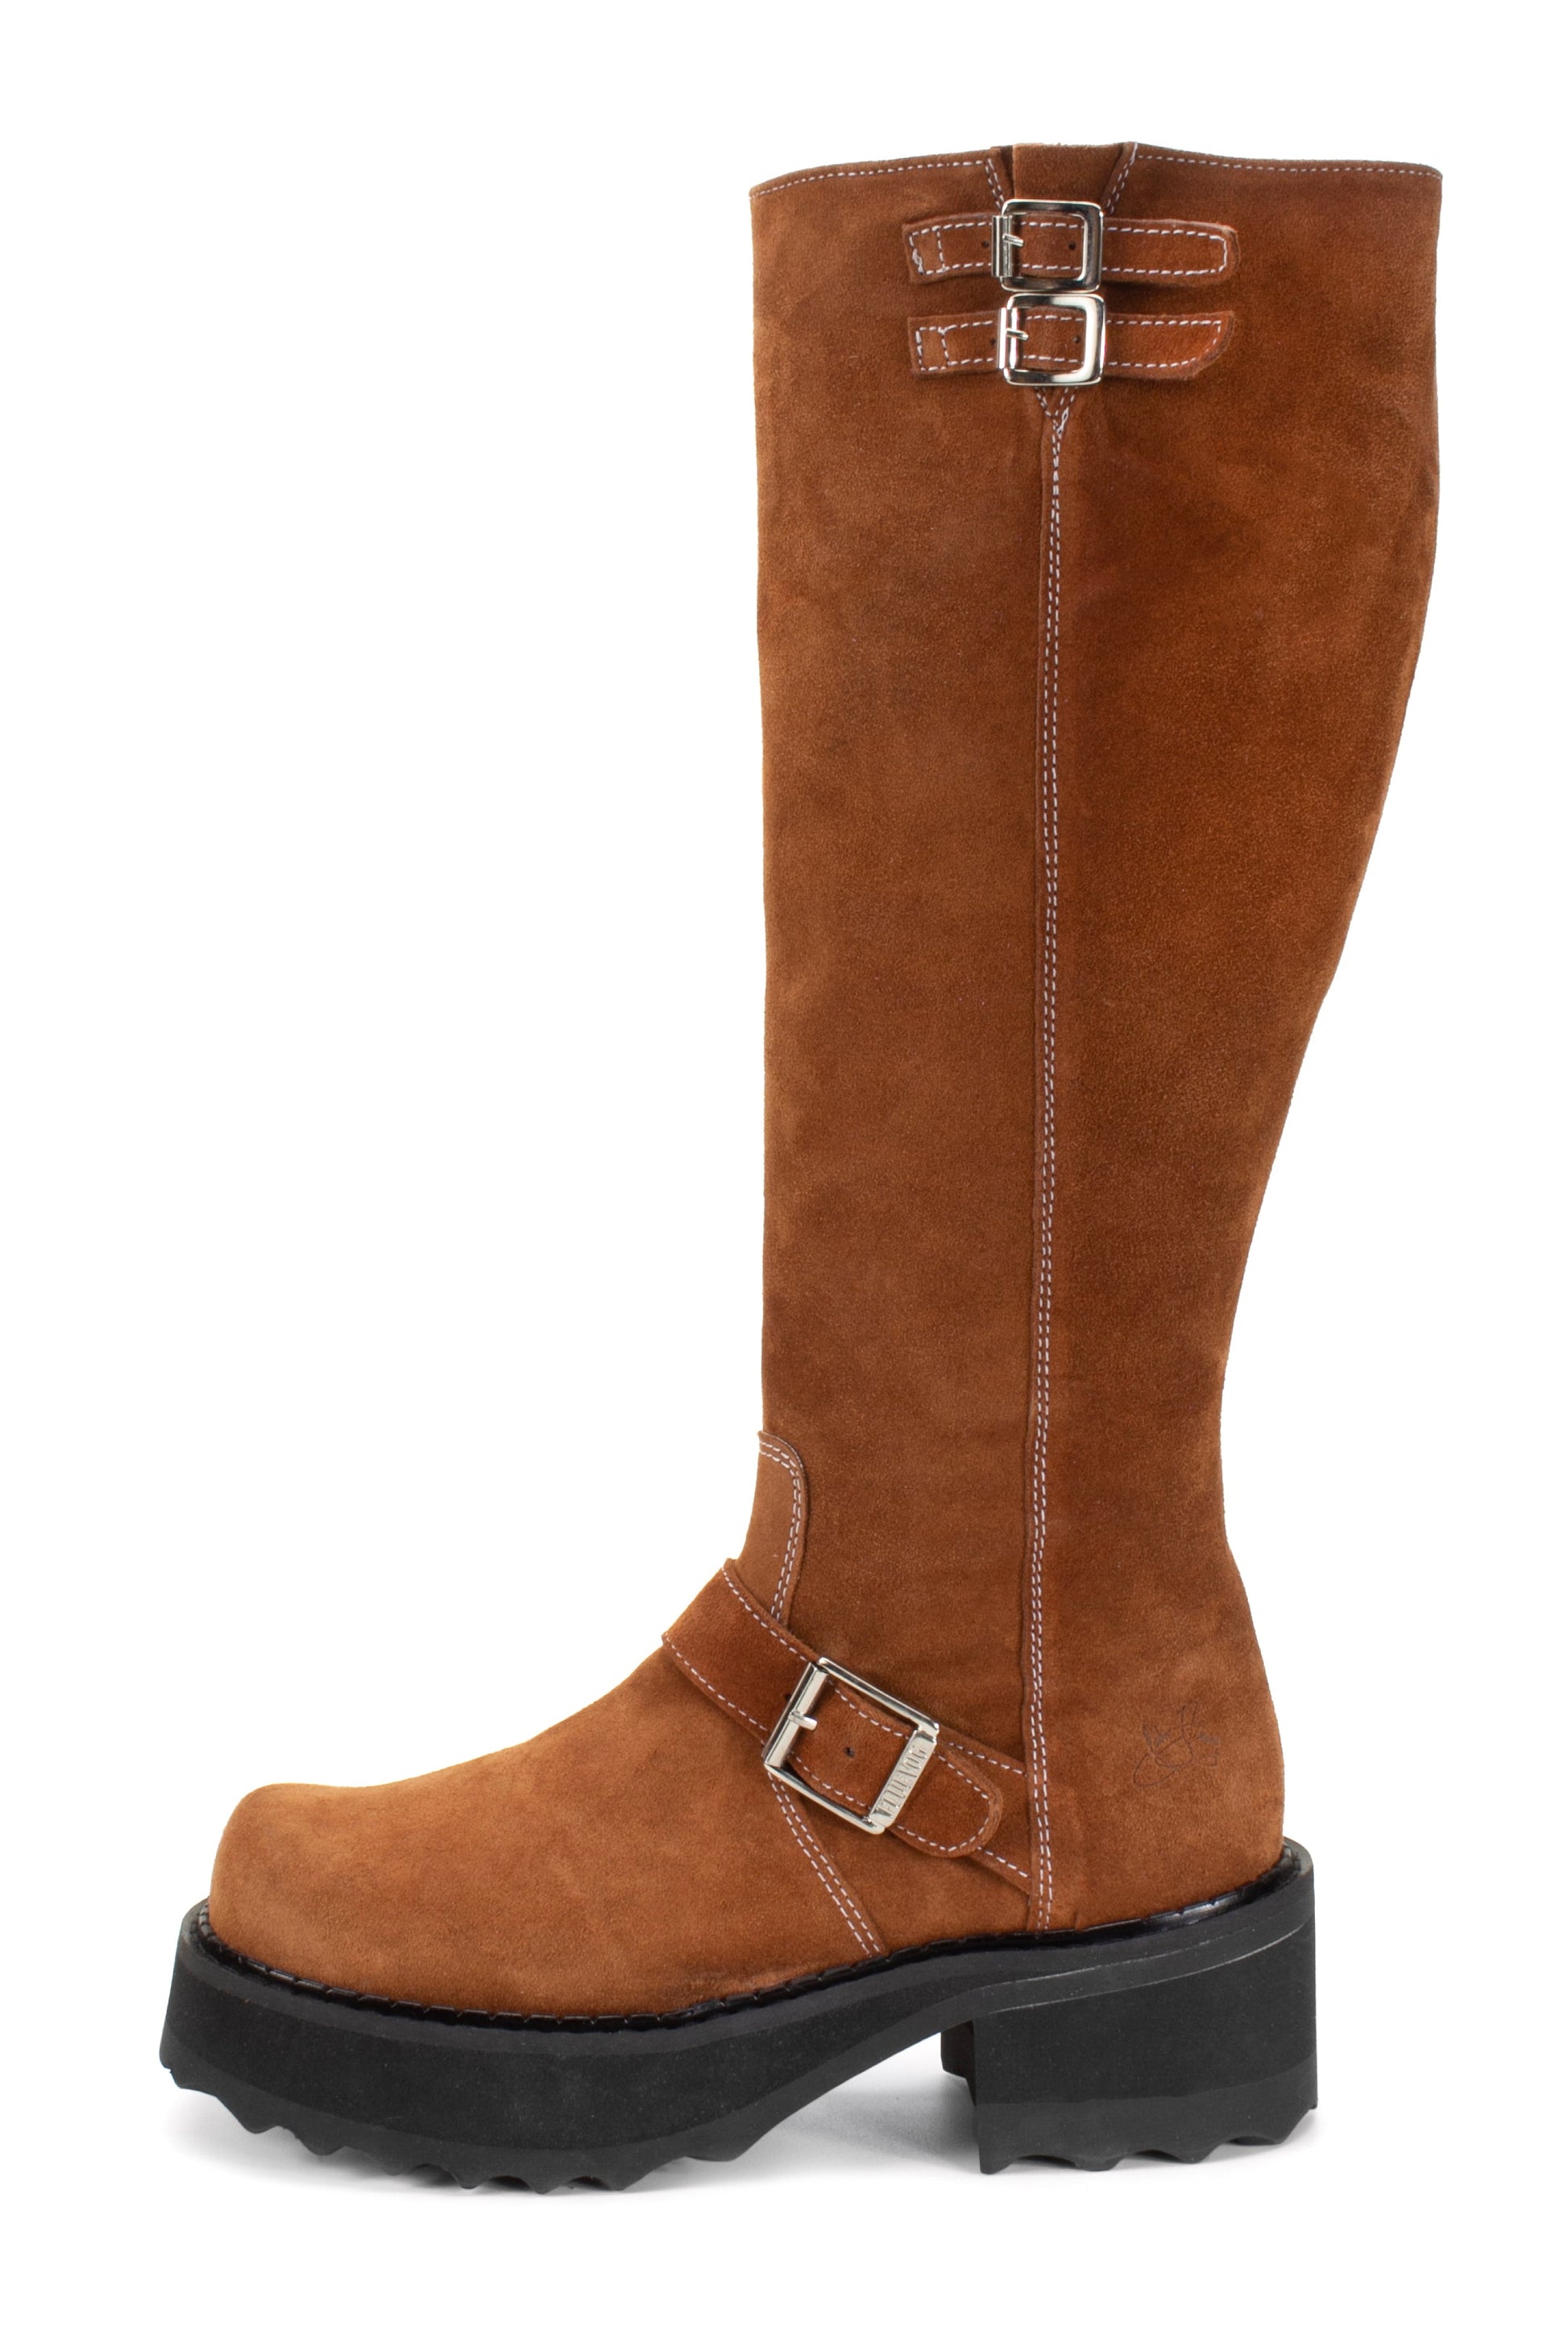 Brown suede Boot, under-the-knee-high, black high sole, white stiches for highlight